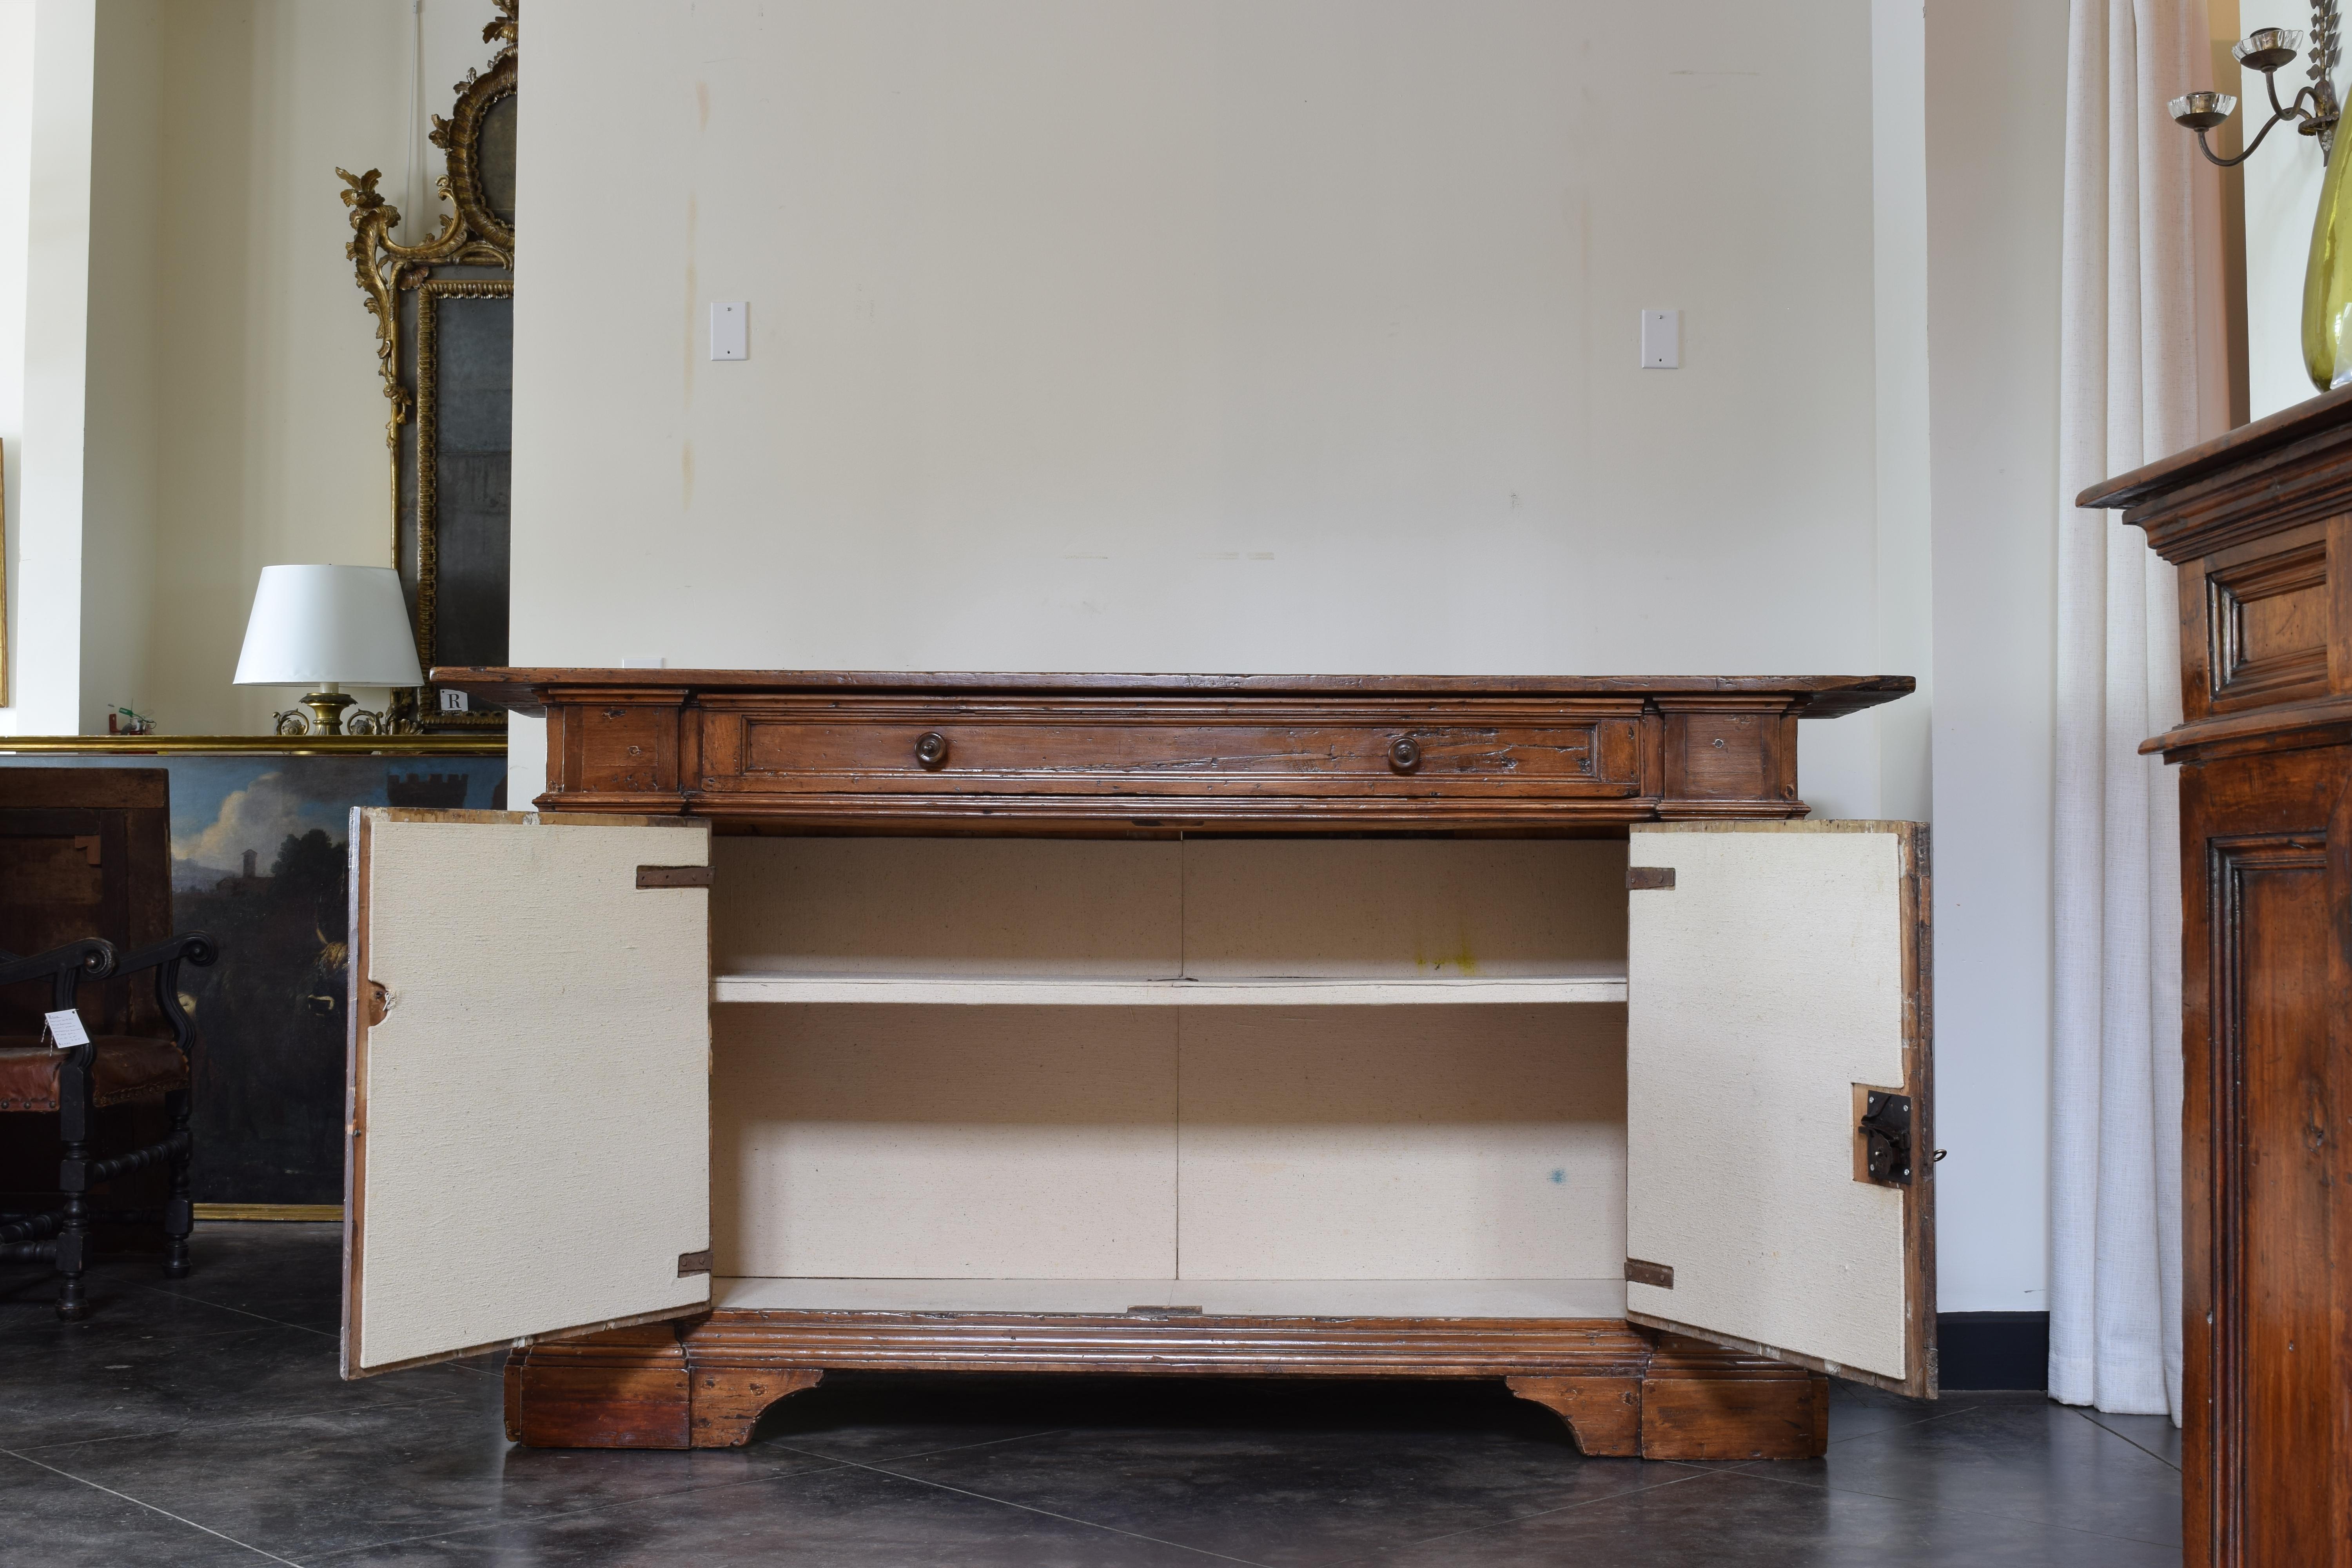 Italian Late Baroque Stained Fir-wood 1-Drawer, 2-Door Credenza, early 18th cen. For Sale 2